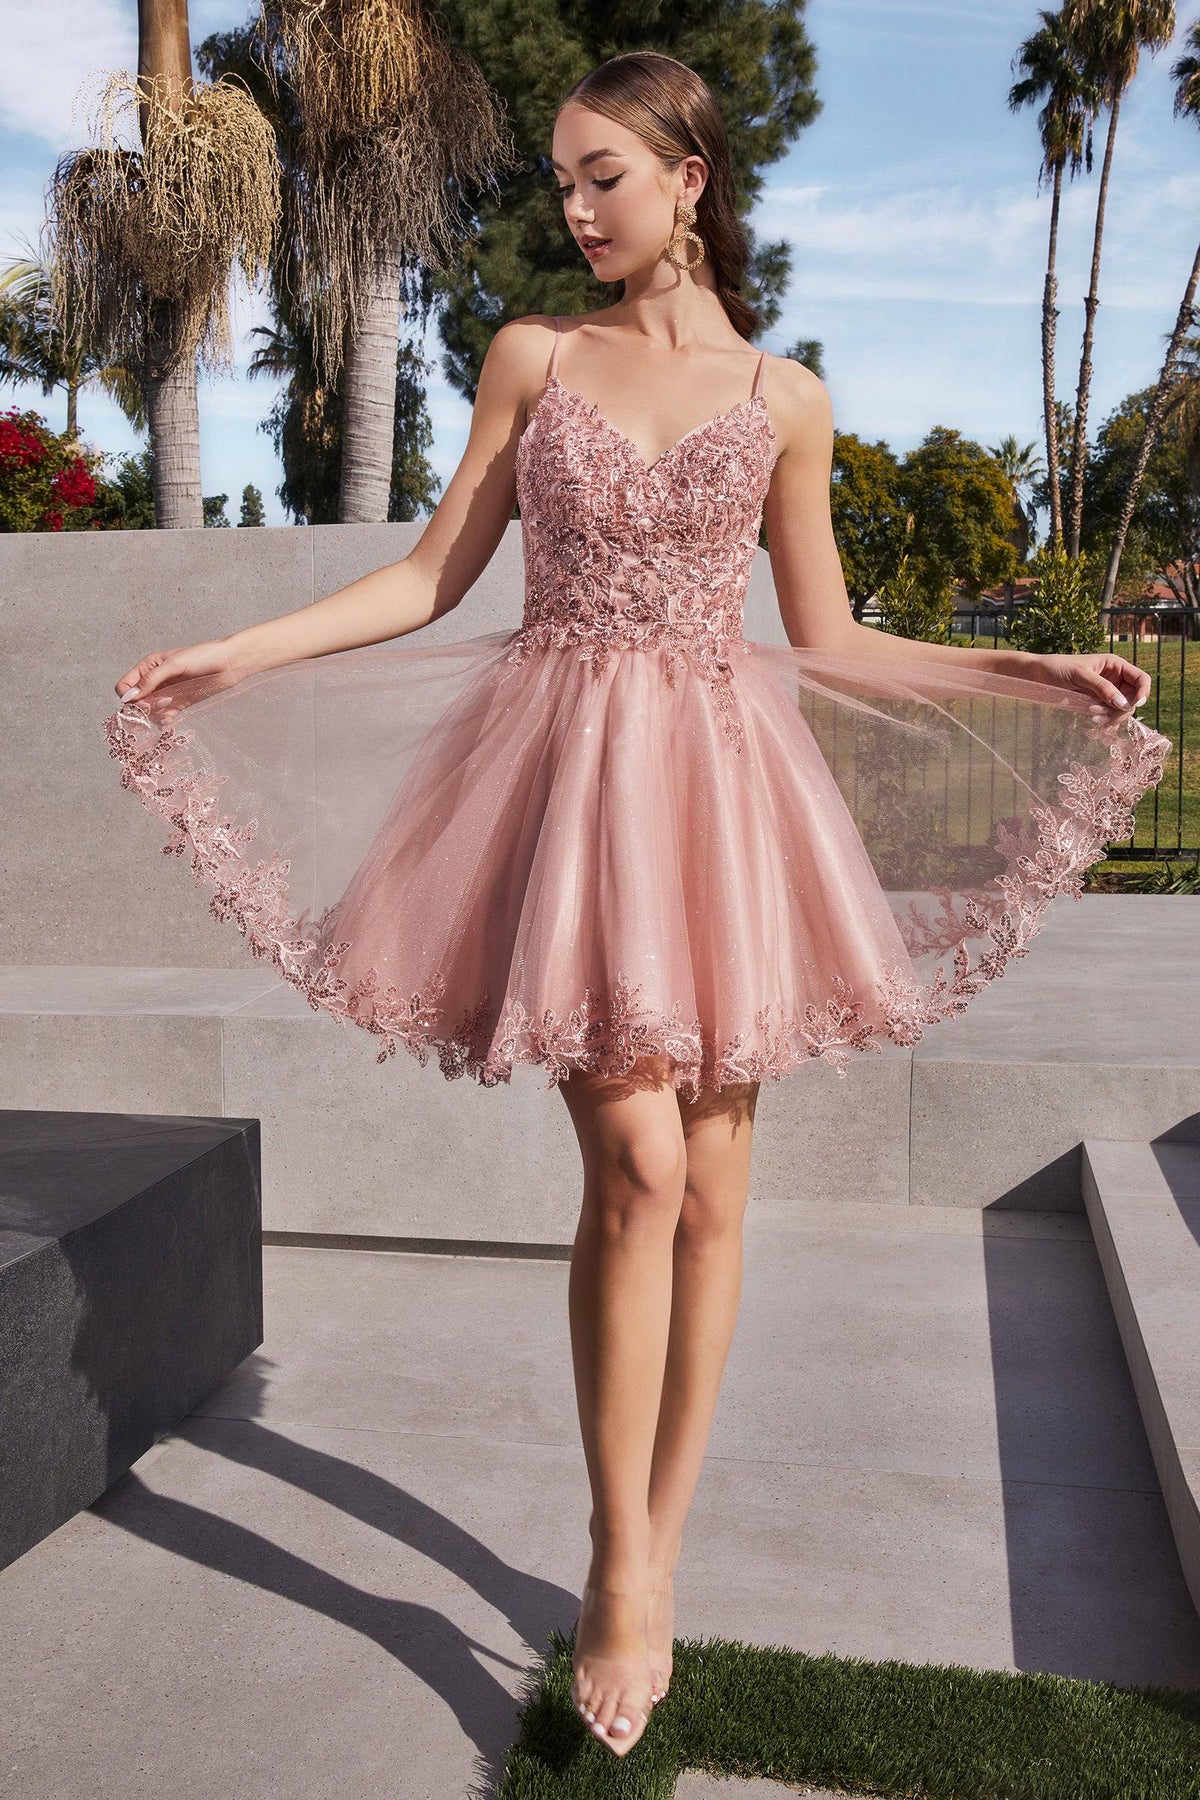 Cinderella Divine CD0213 Lace Embroidered Sparkling Blush Short Dress With Tulle Skirt - Norma Reed - NORMA REED